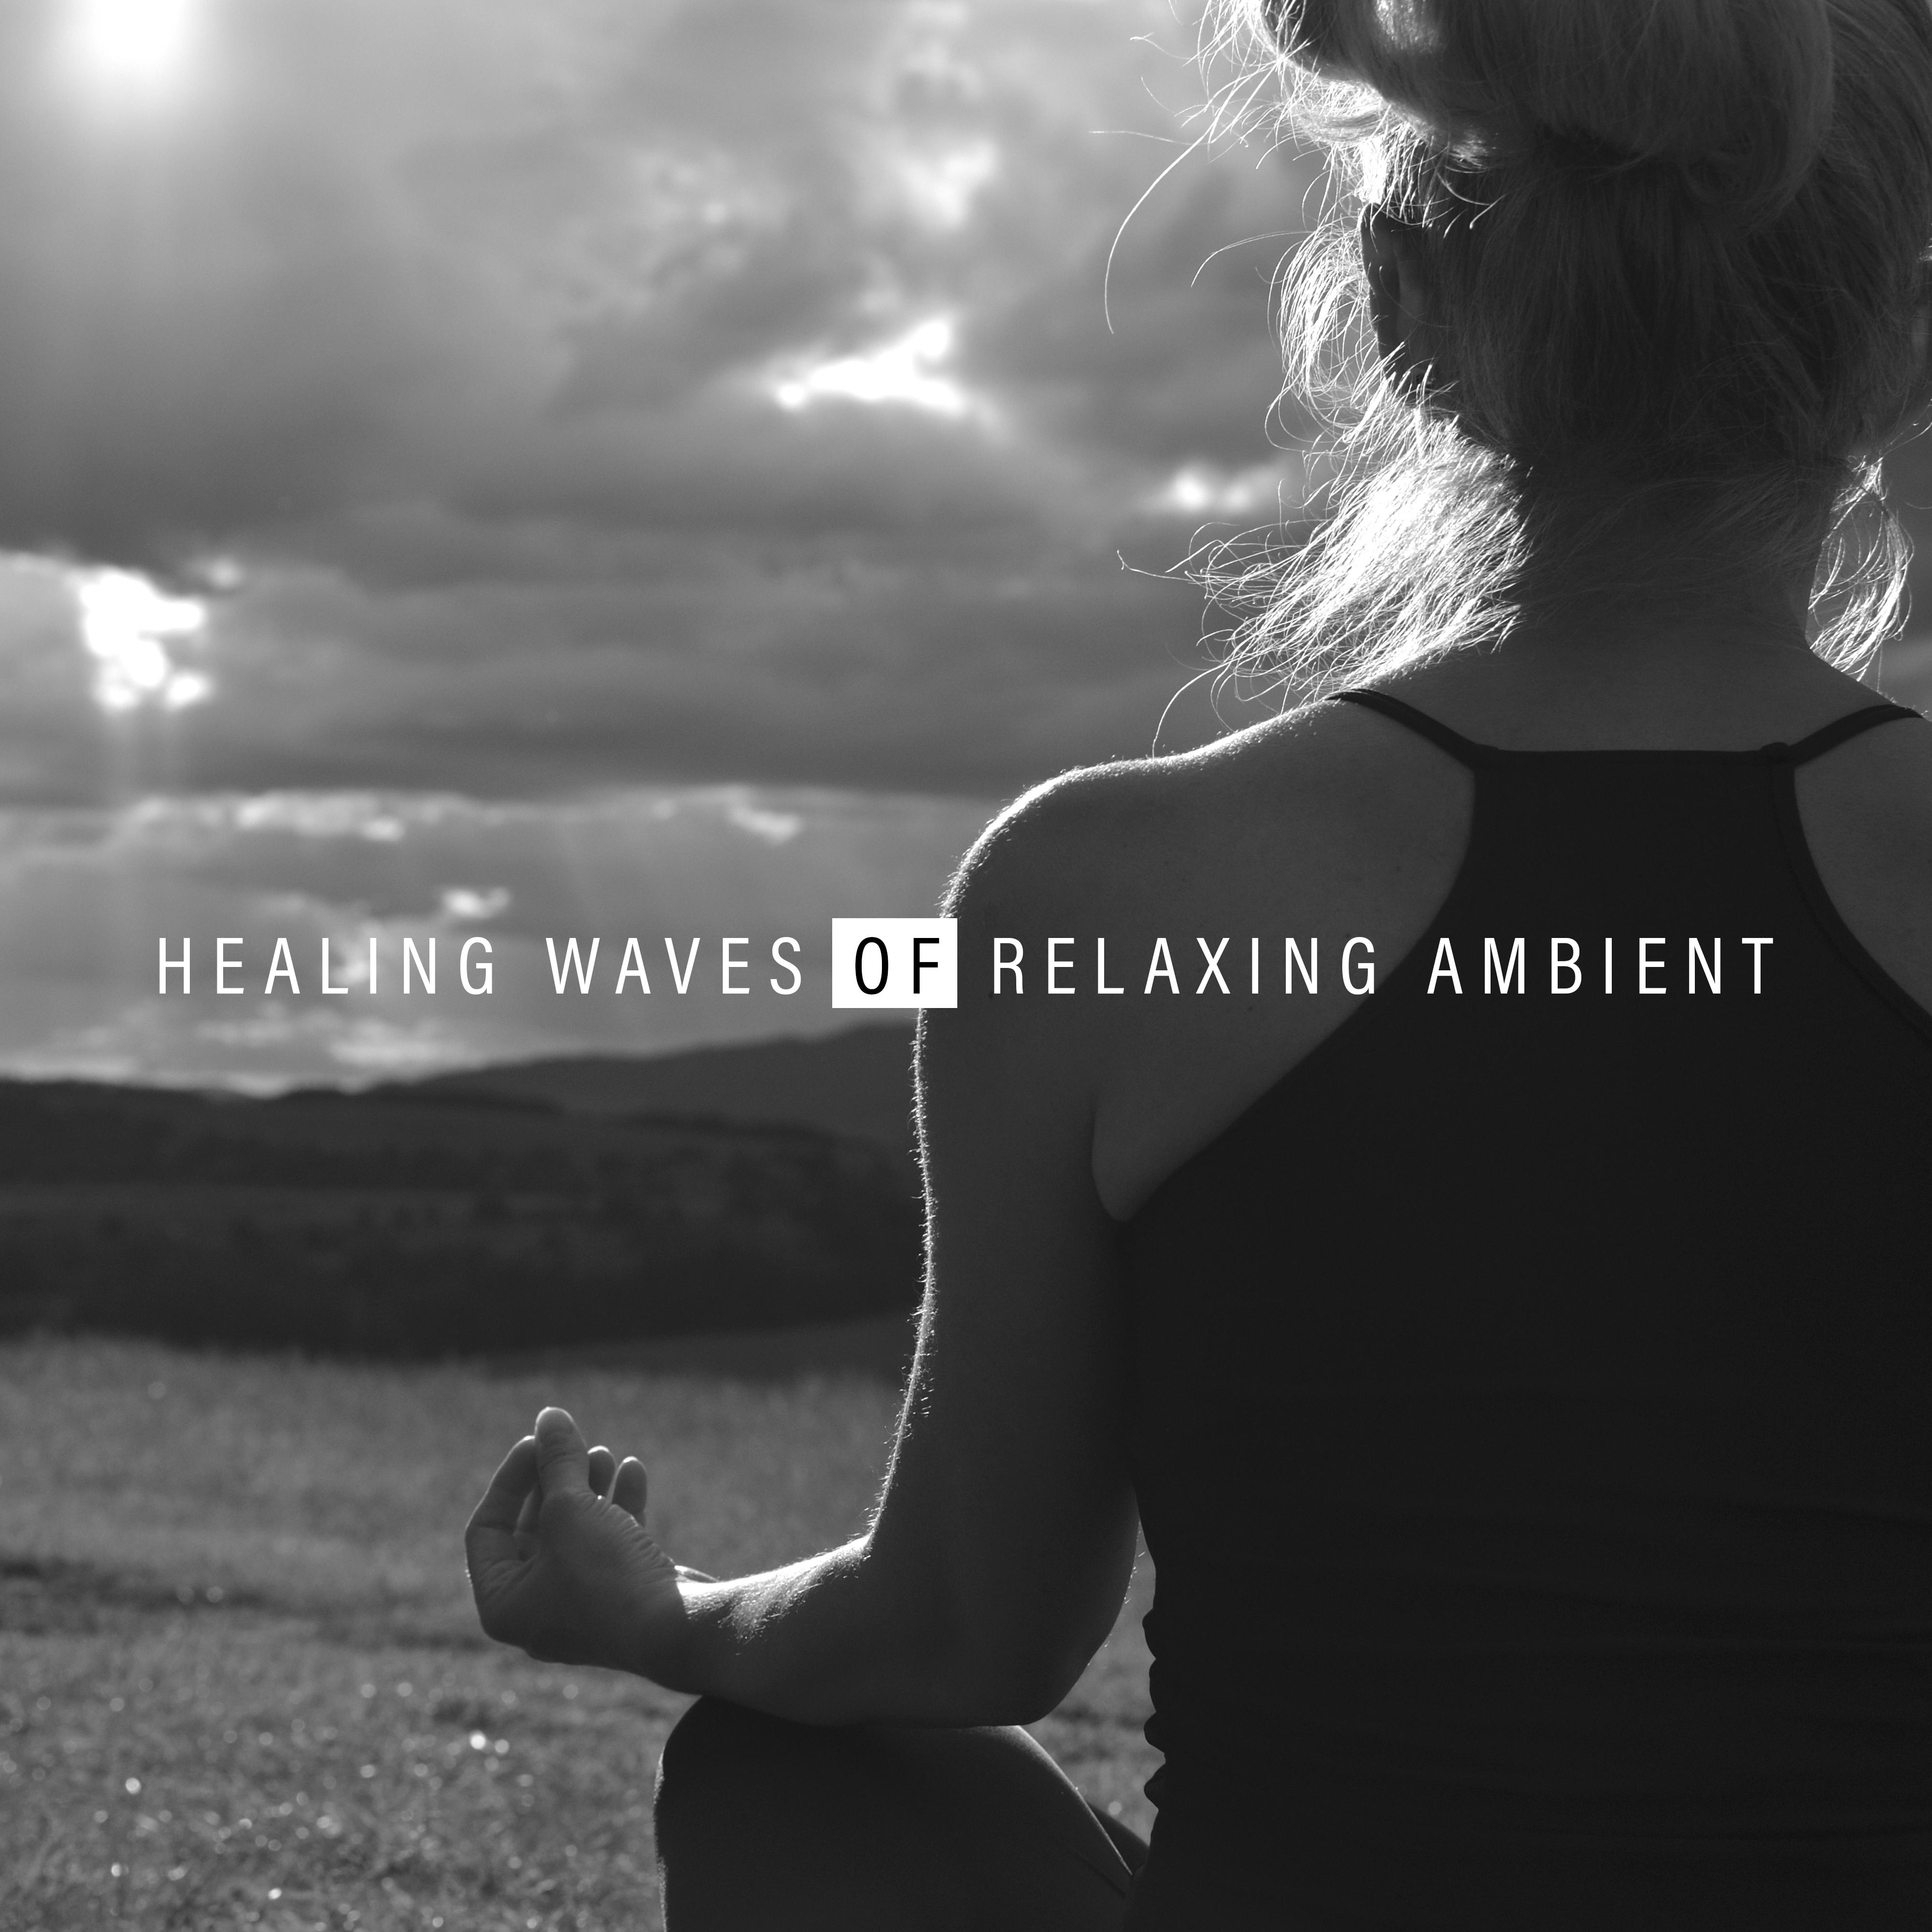 Healing Waves of Relaxing Ambient: 2019 New Age Ambient Music for Perfect Body & Mind Relaxation, Calming Soft Sounds, Inner Energy Increase